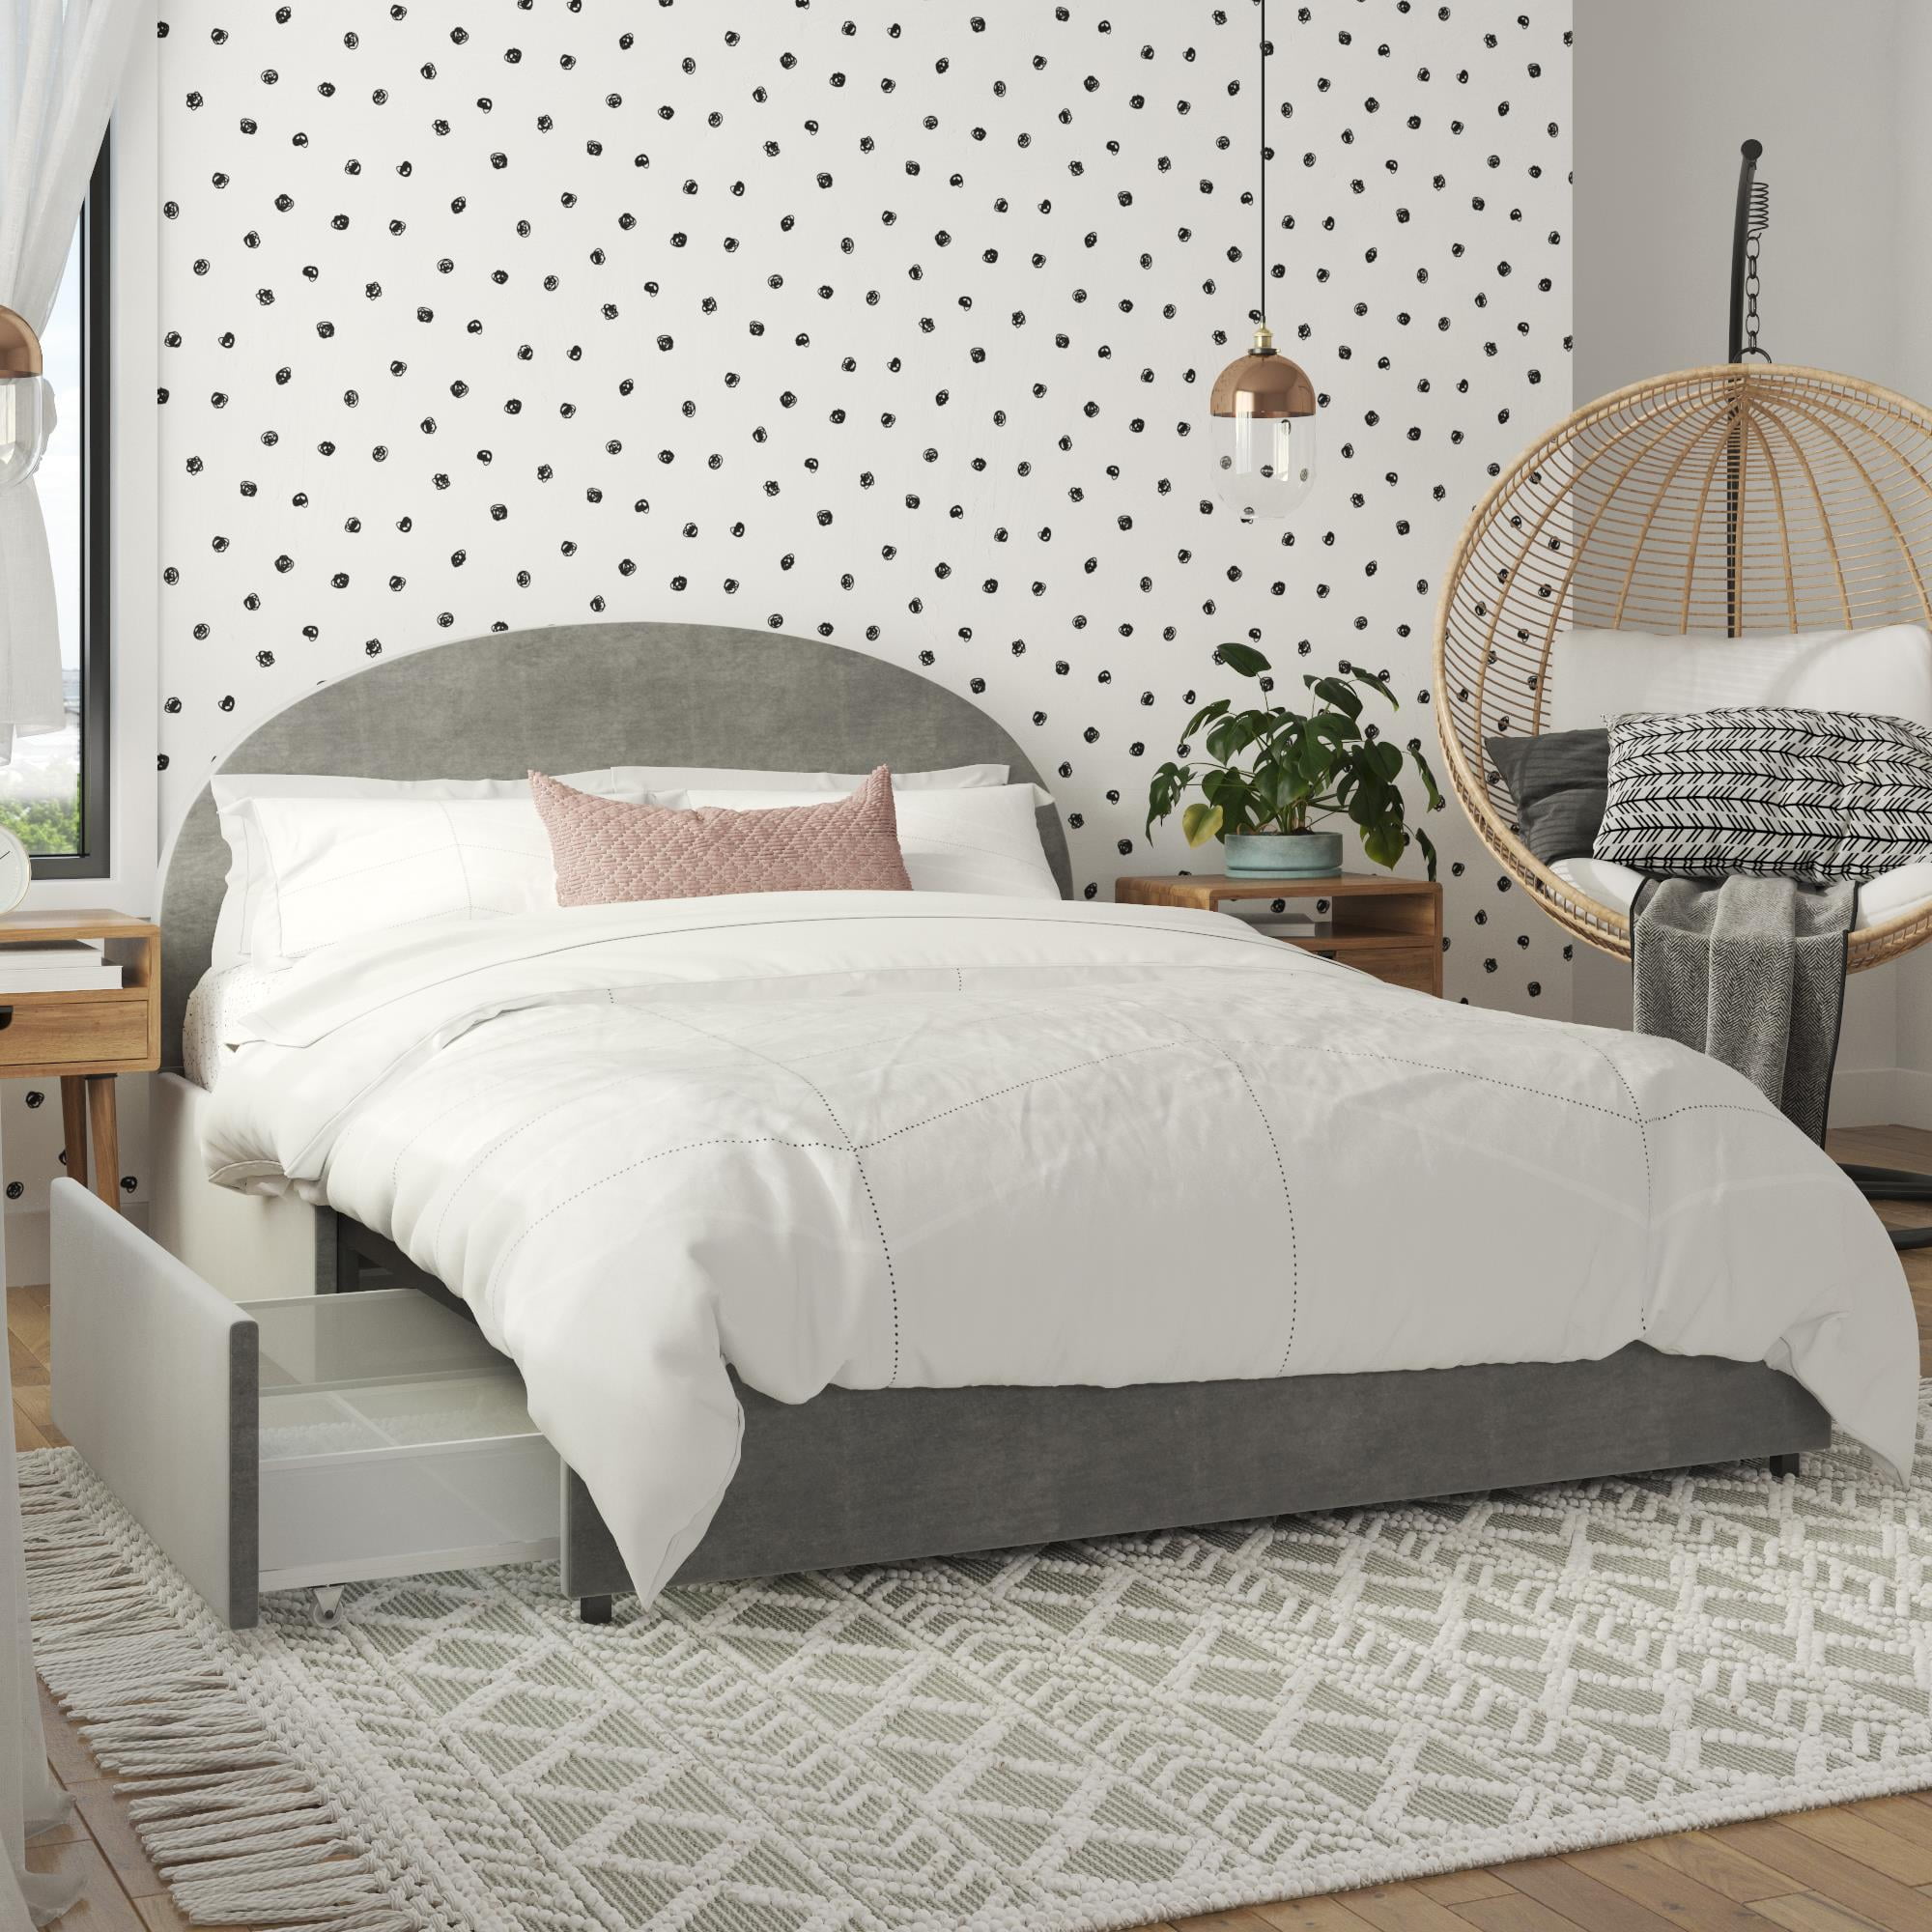 Mr Kate Moon Upholstered Bed With Storage Full Size Frame Light Gray